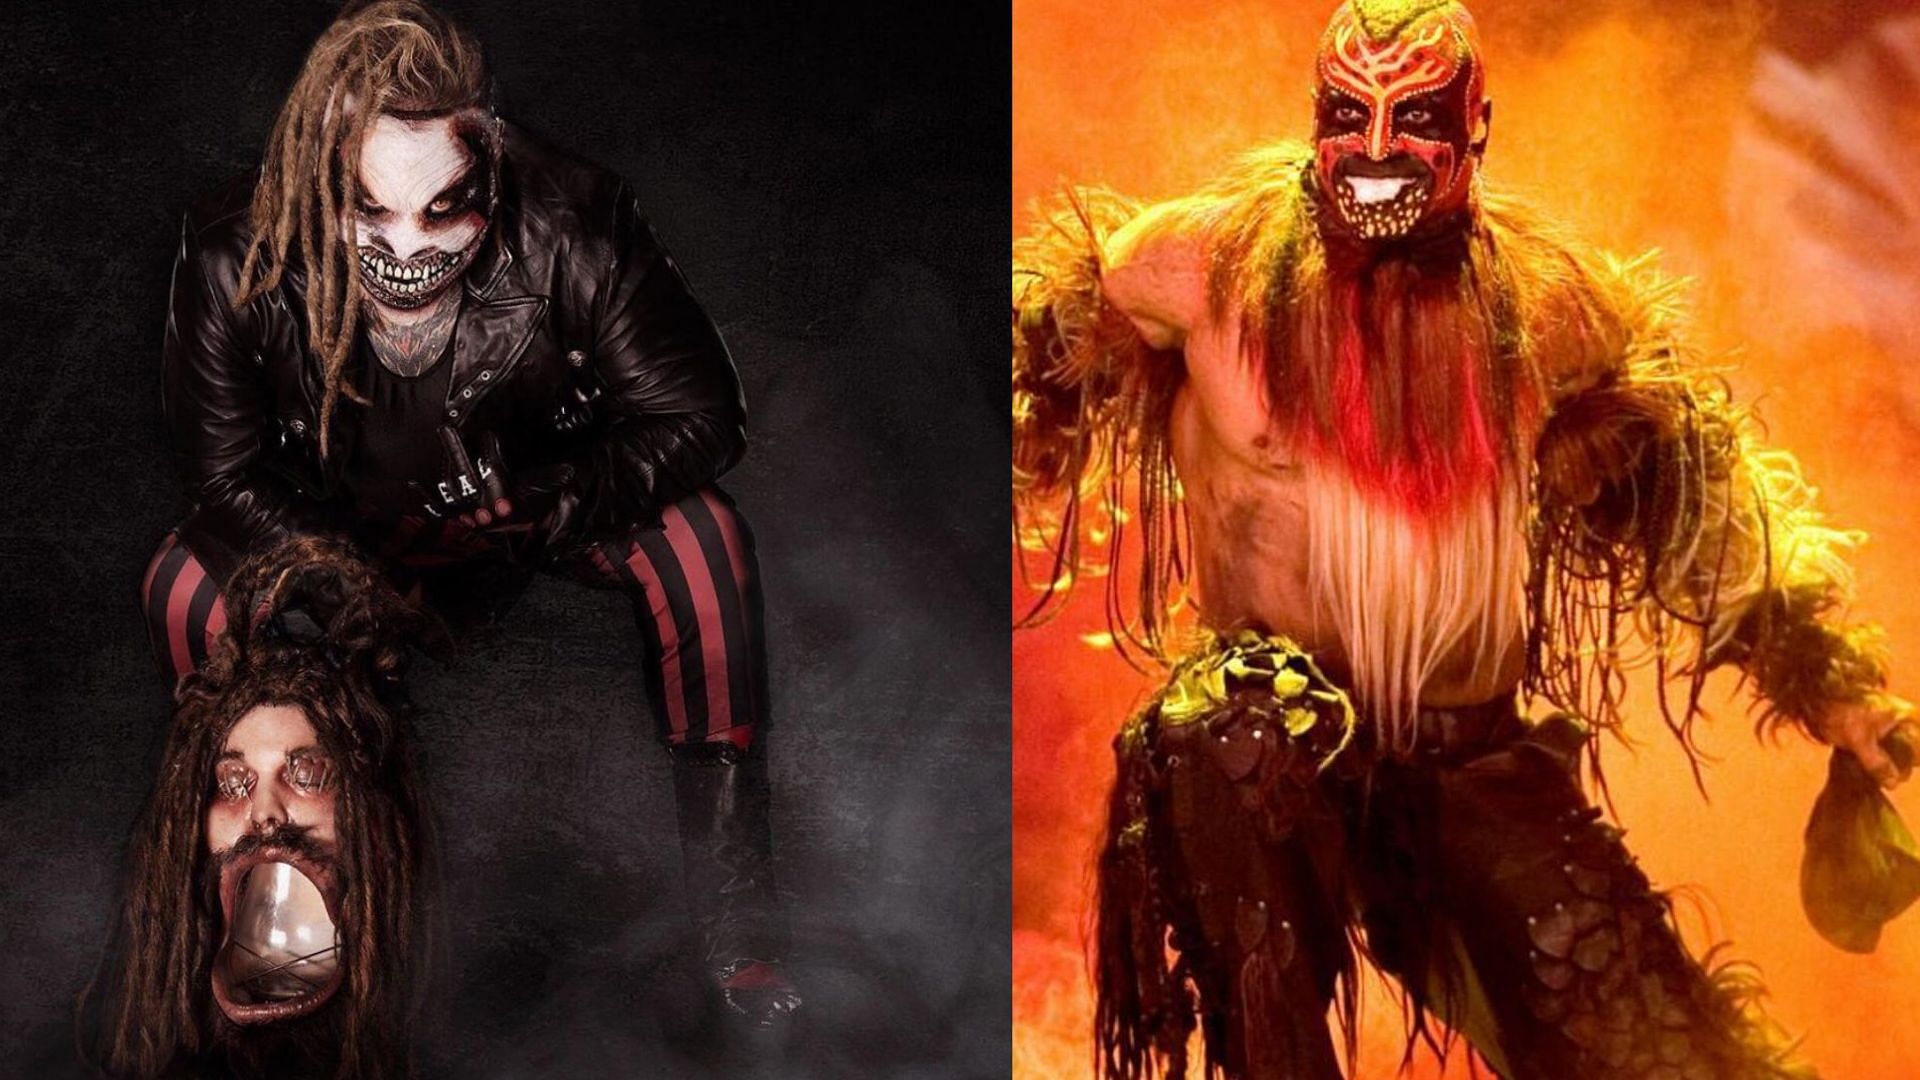 These WWE Superstars struck fear in the hearts of all those who were captivated by their prescence.